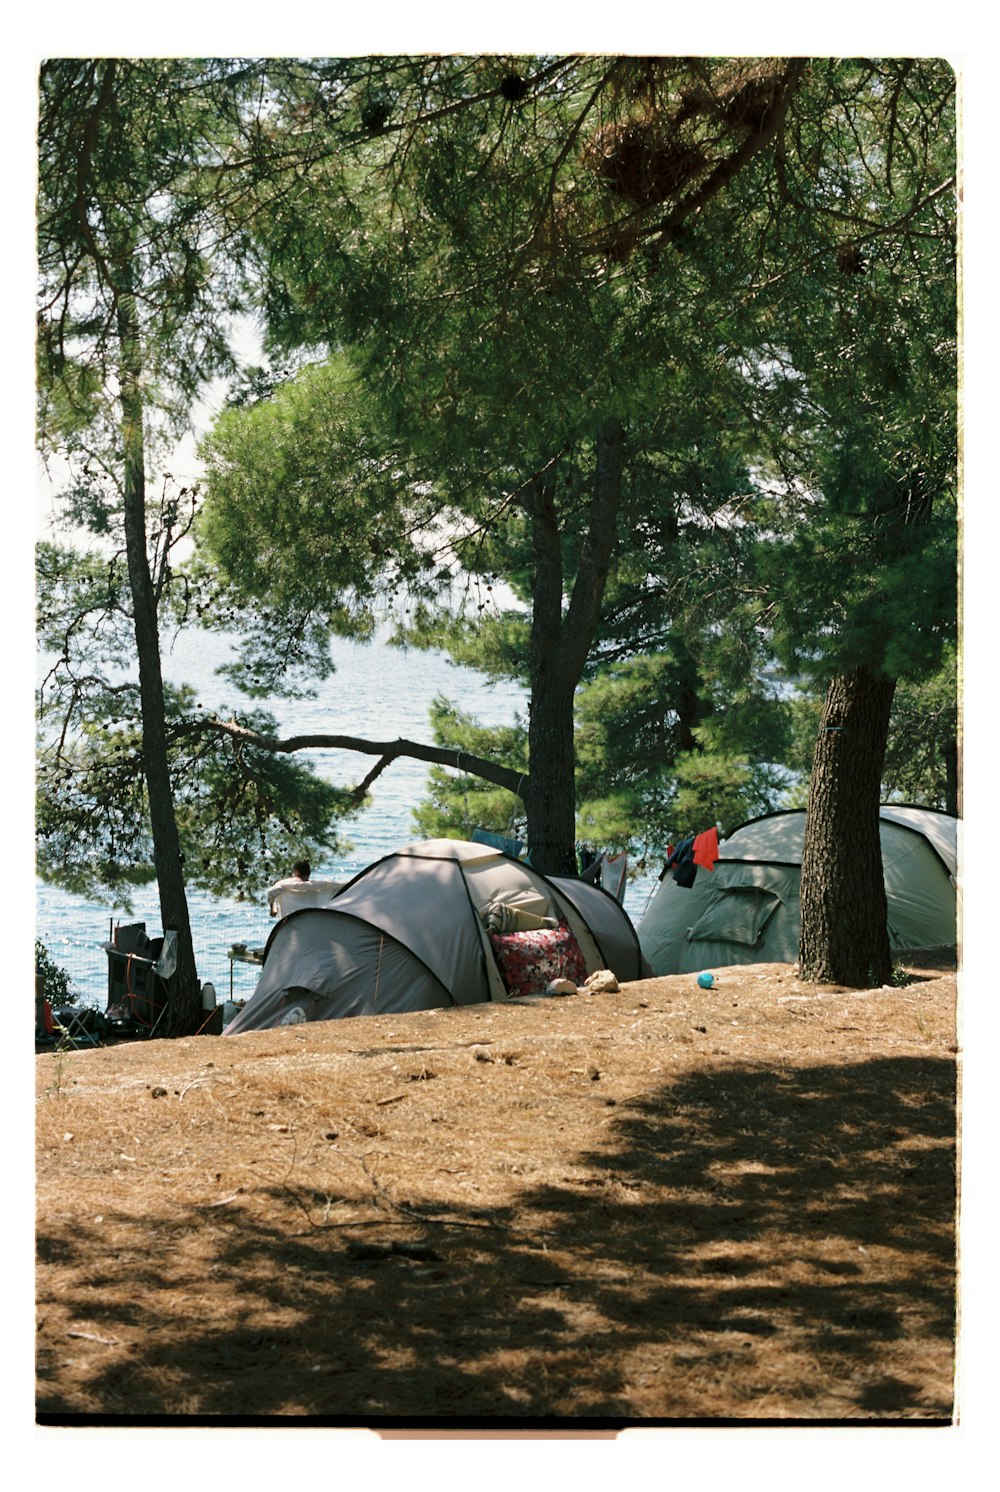 a group of tents pitched up next to trees